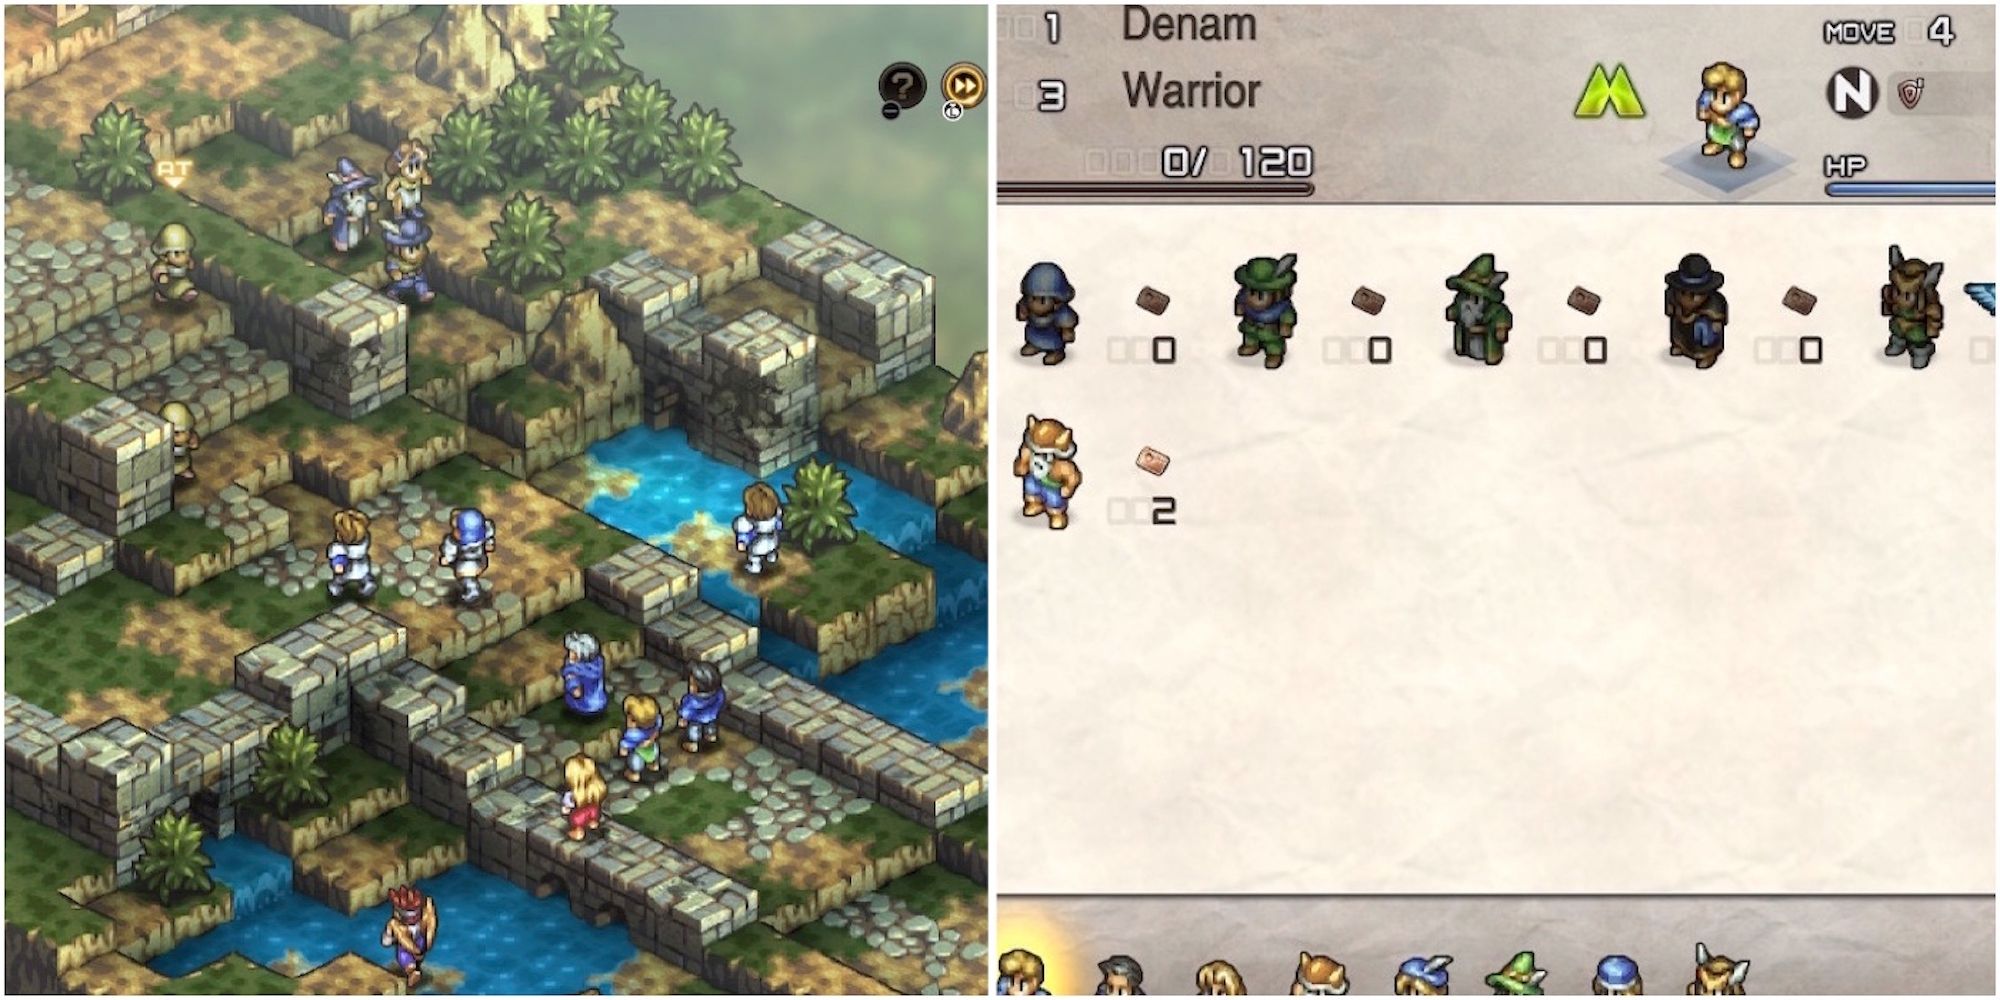 Fighting a battle and the character menu in Tactics Ogre Reborn